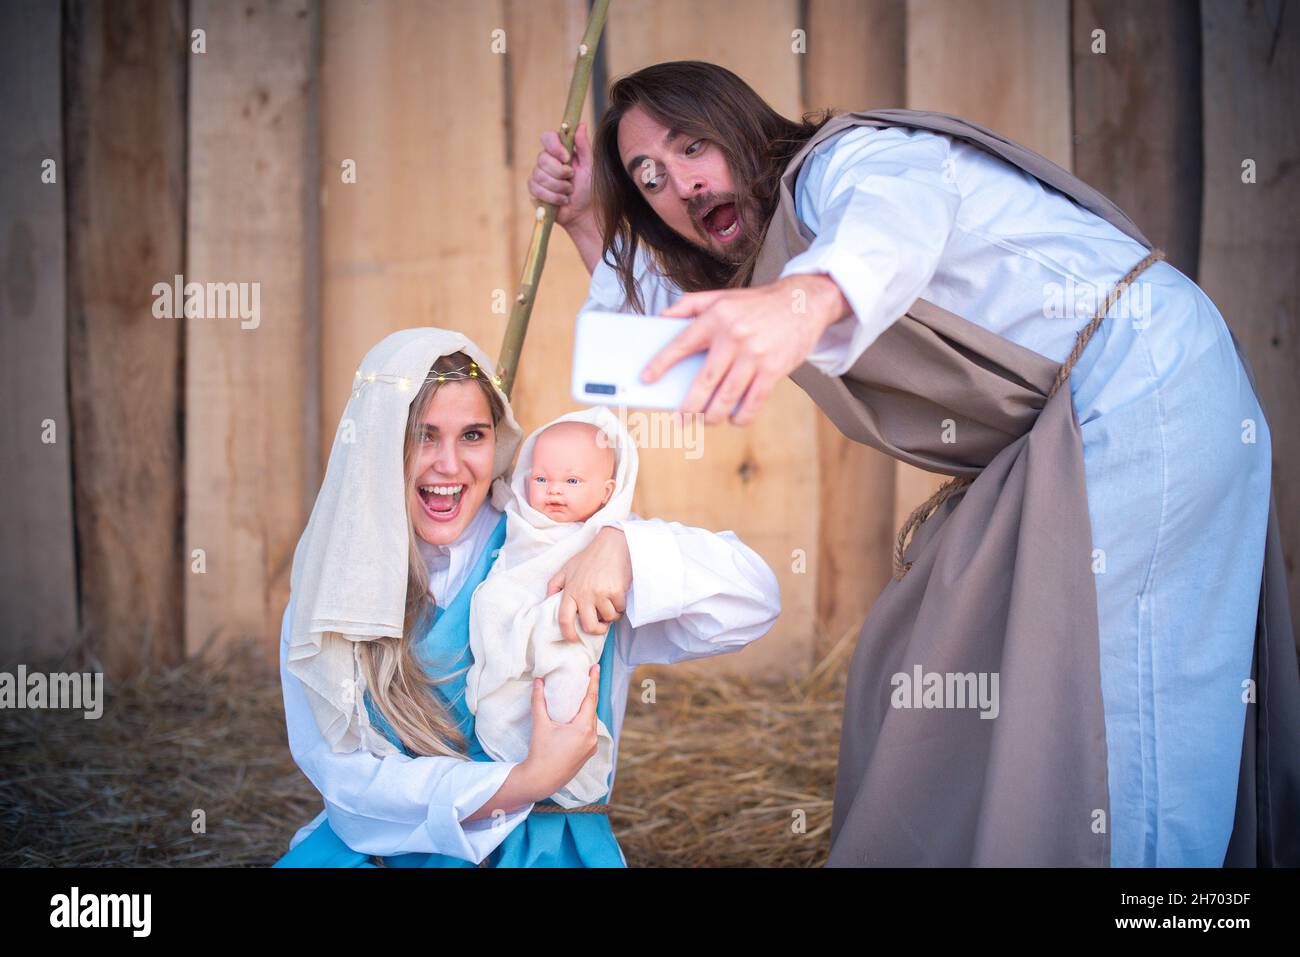 Biblical characters taking selfie while laughing and joking. Nativity scene Stock Photo